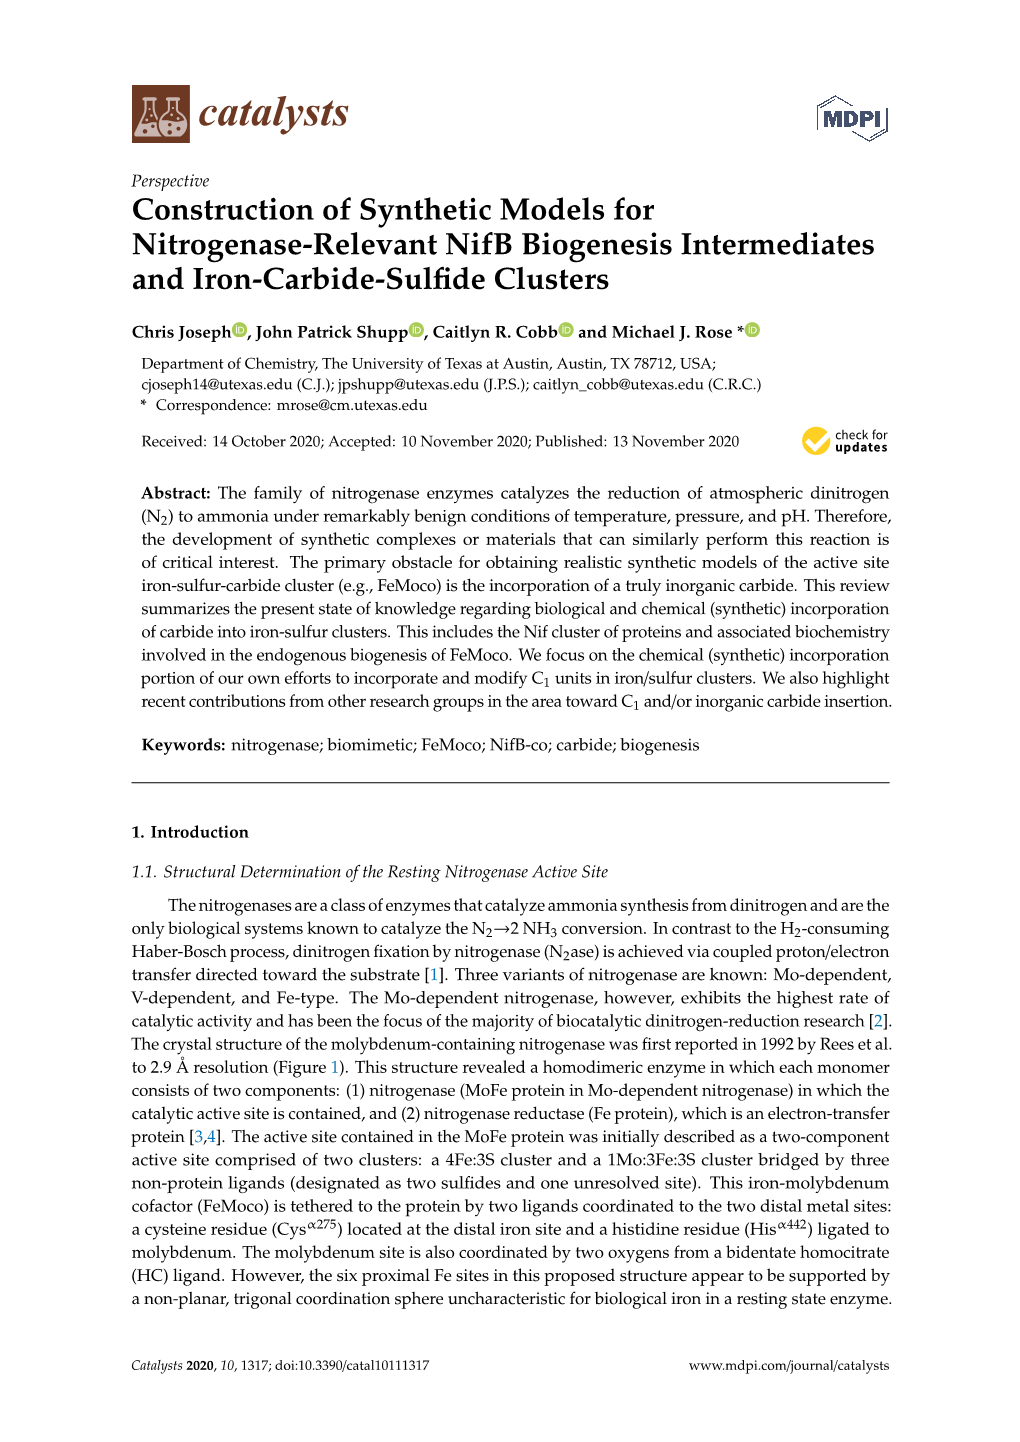 Construction of Synthetic Models for Nitrogenase-Relevant Nifb Biogenesis Intermediates and Iron-Carbide-Sulﬁde Clusters